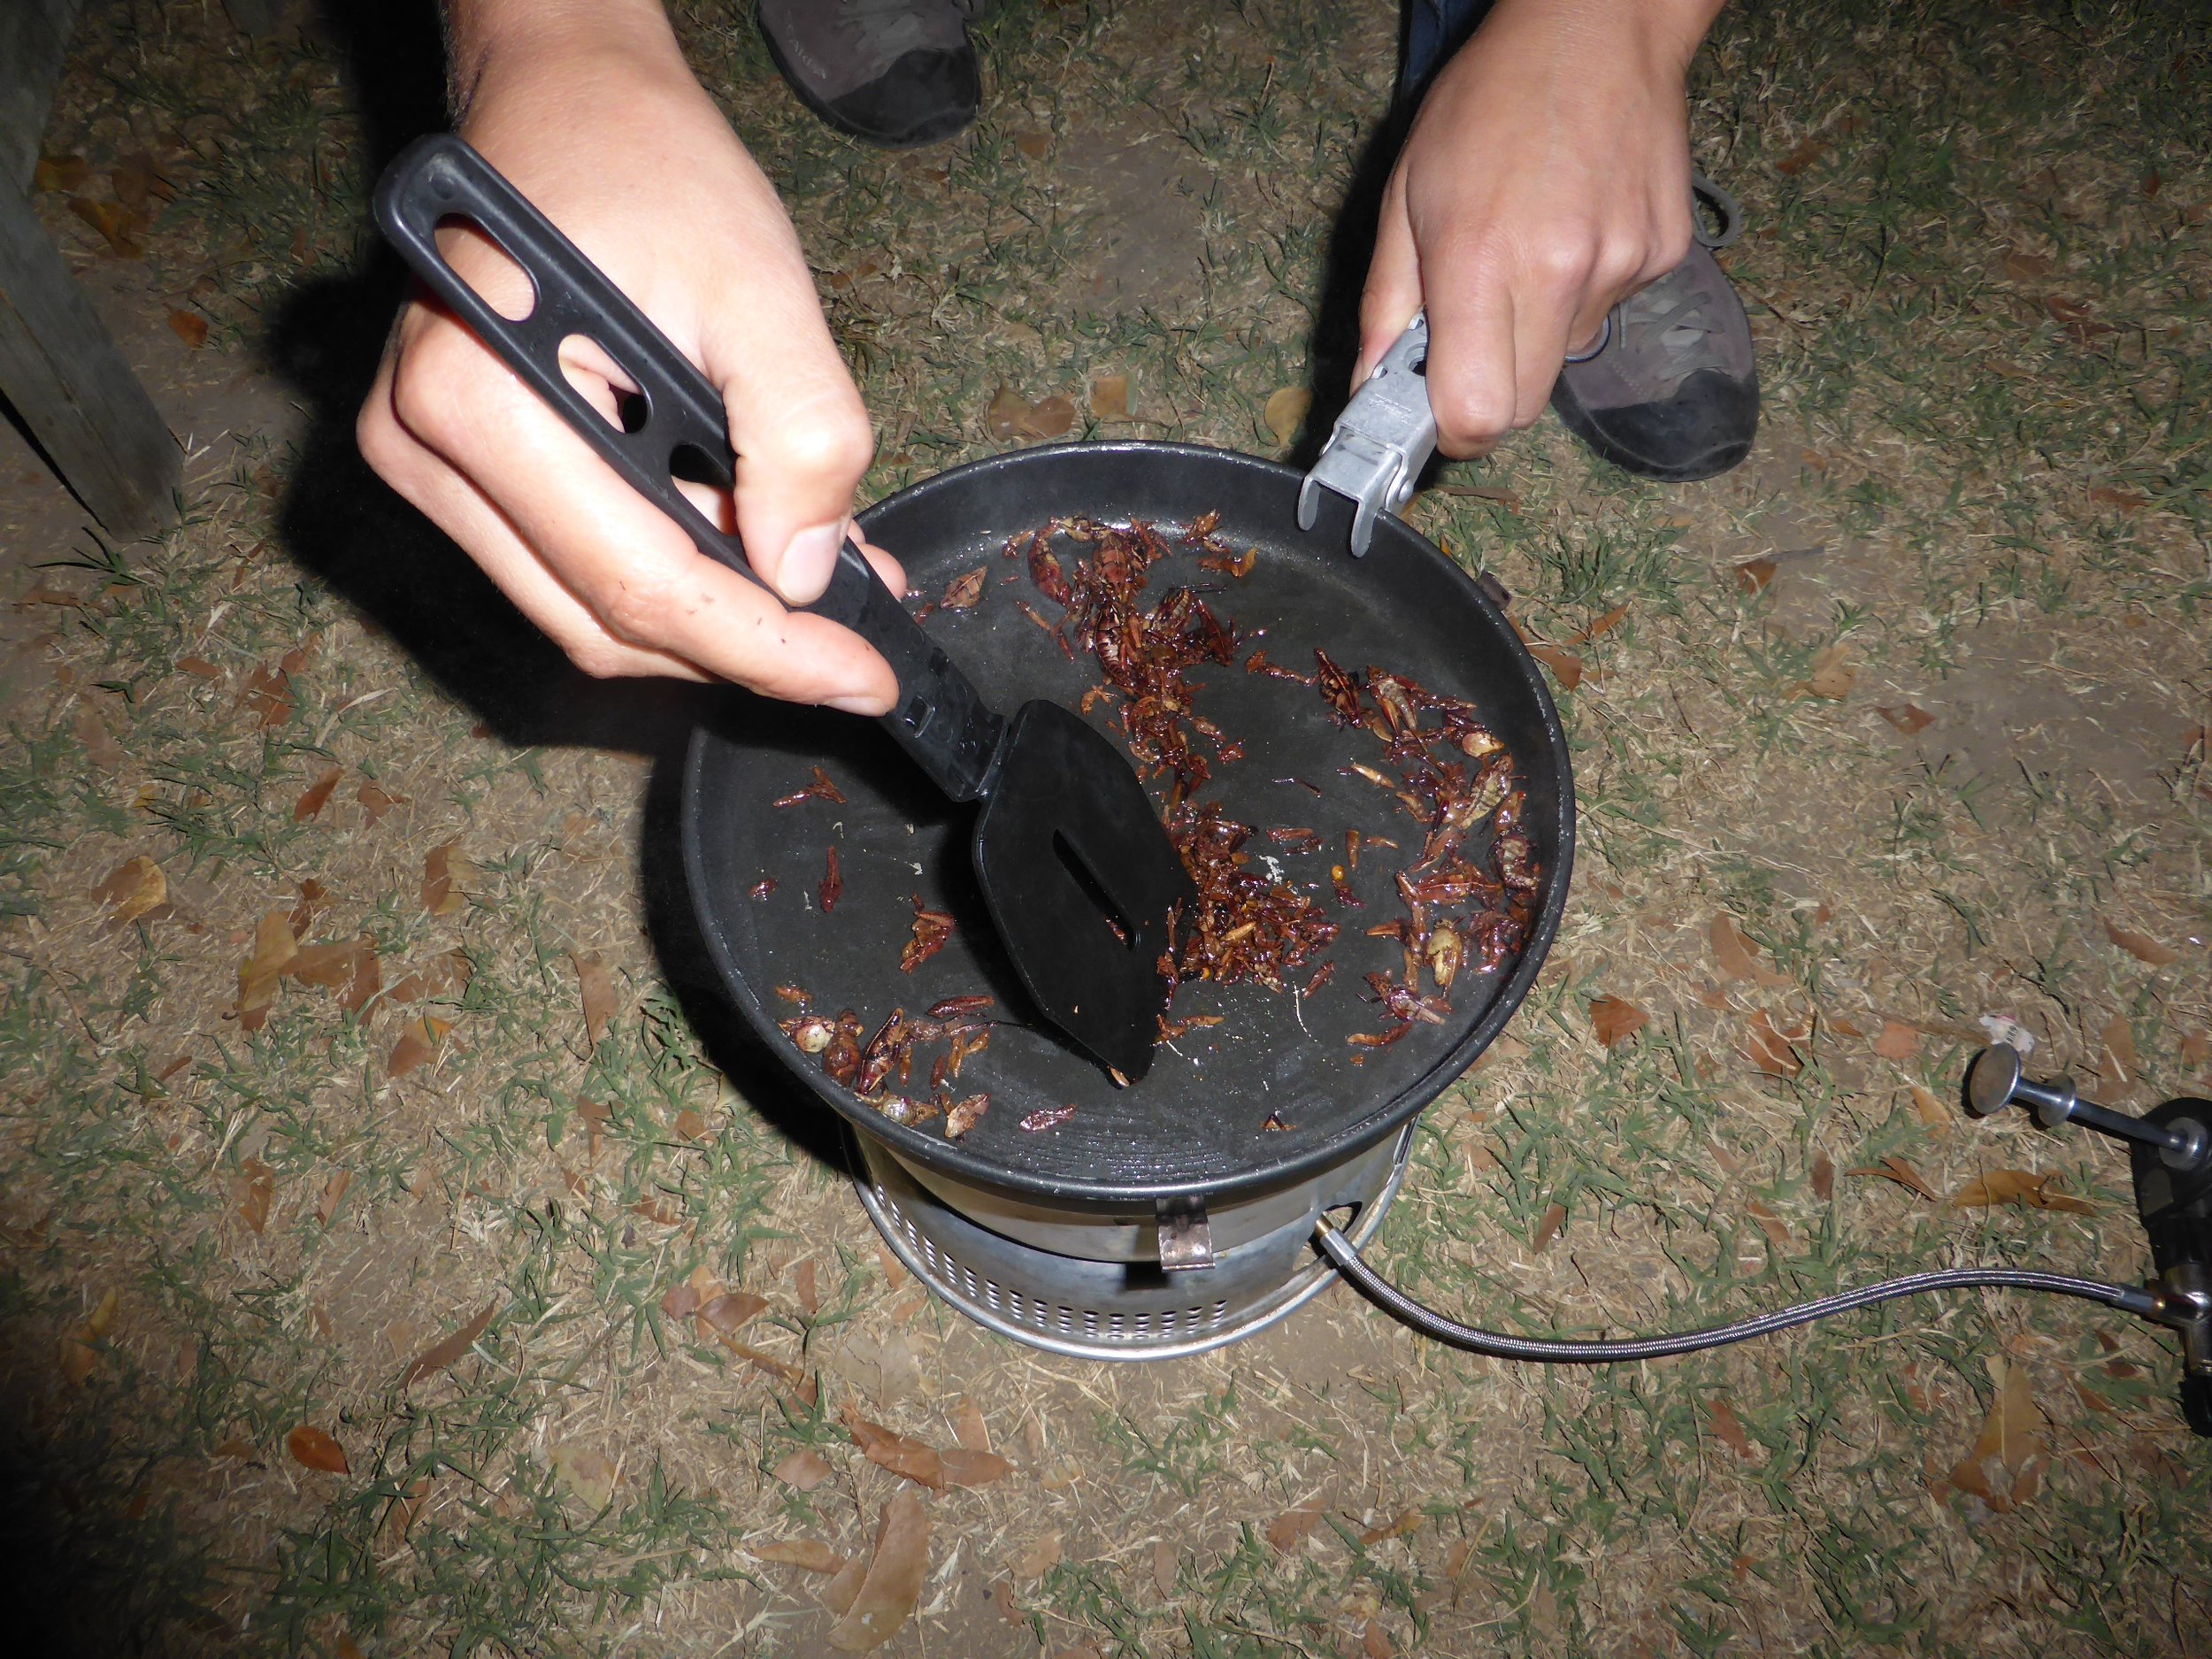  Michelle Lamphere: Eating bugs in Mexico 2014 